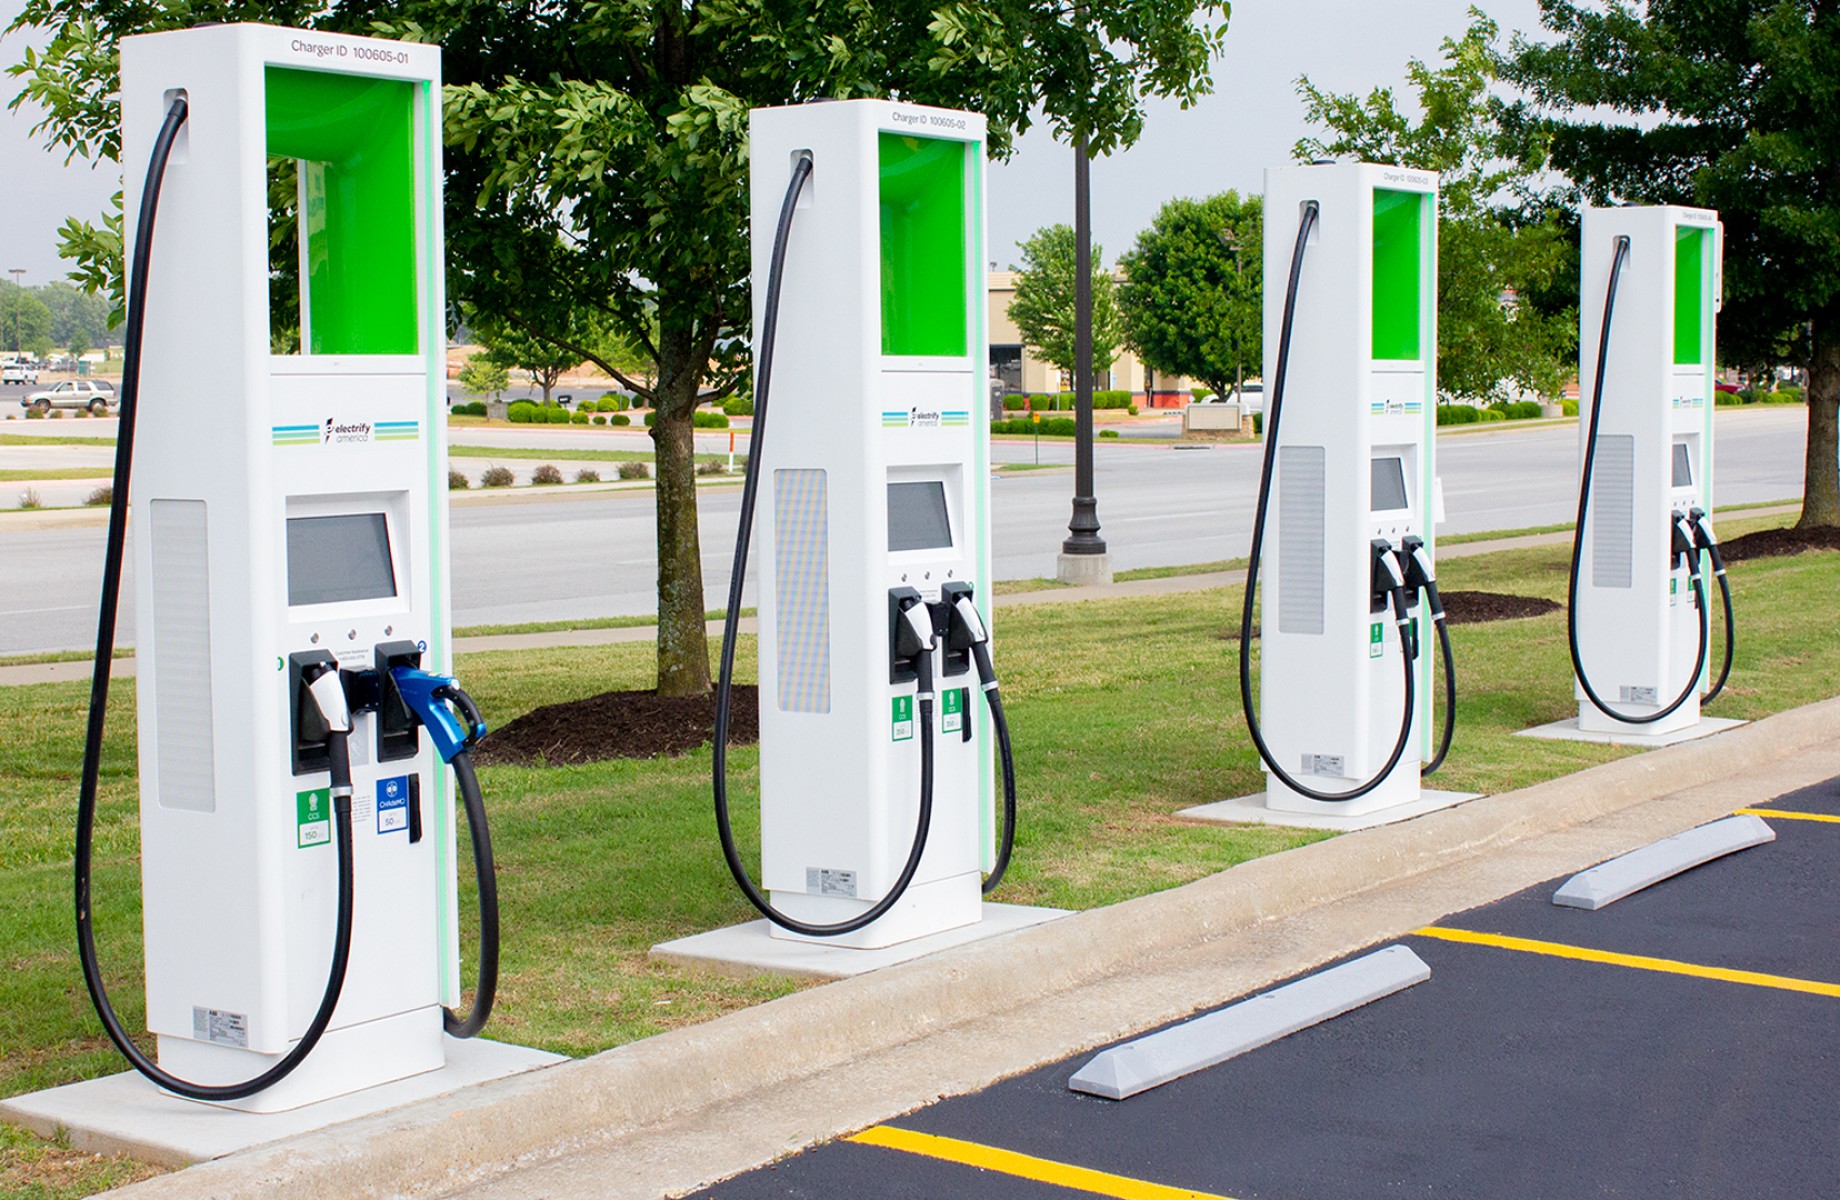 google-maps-adds-locations-of-electric-vehicle-charging-stations-by